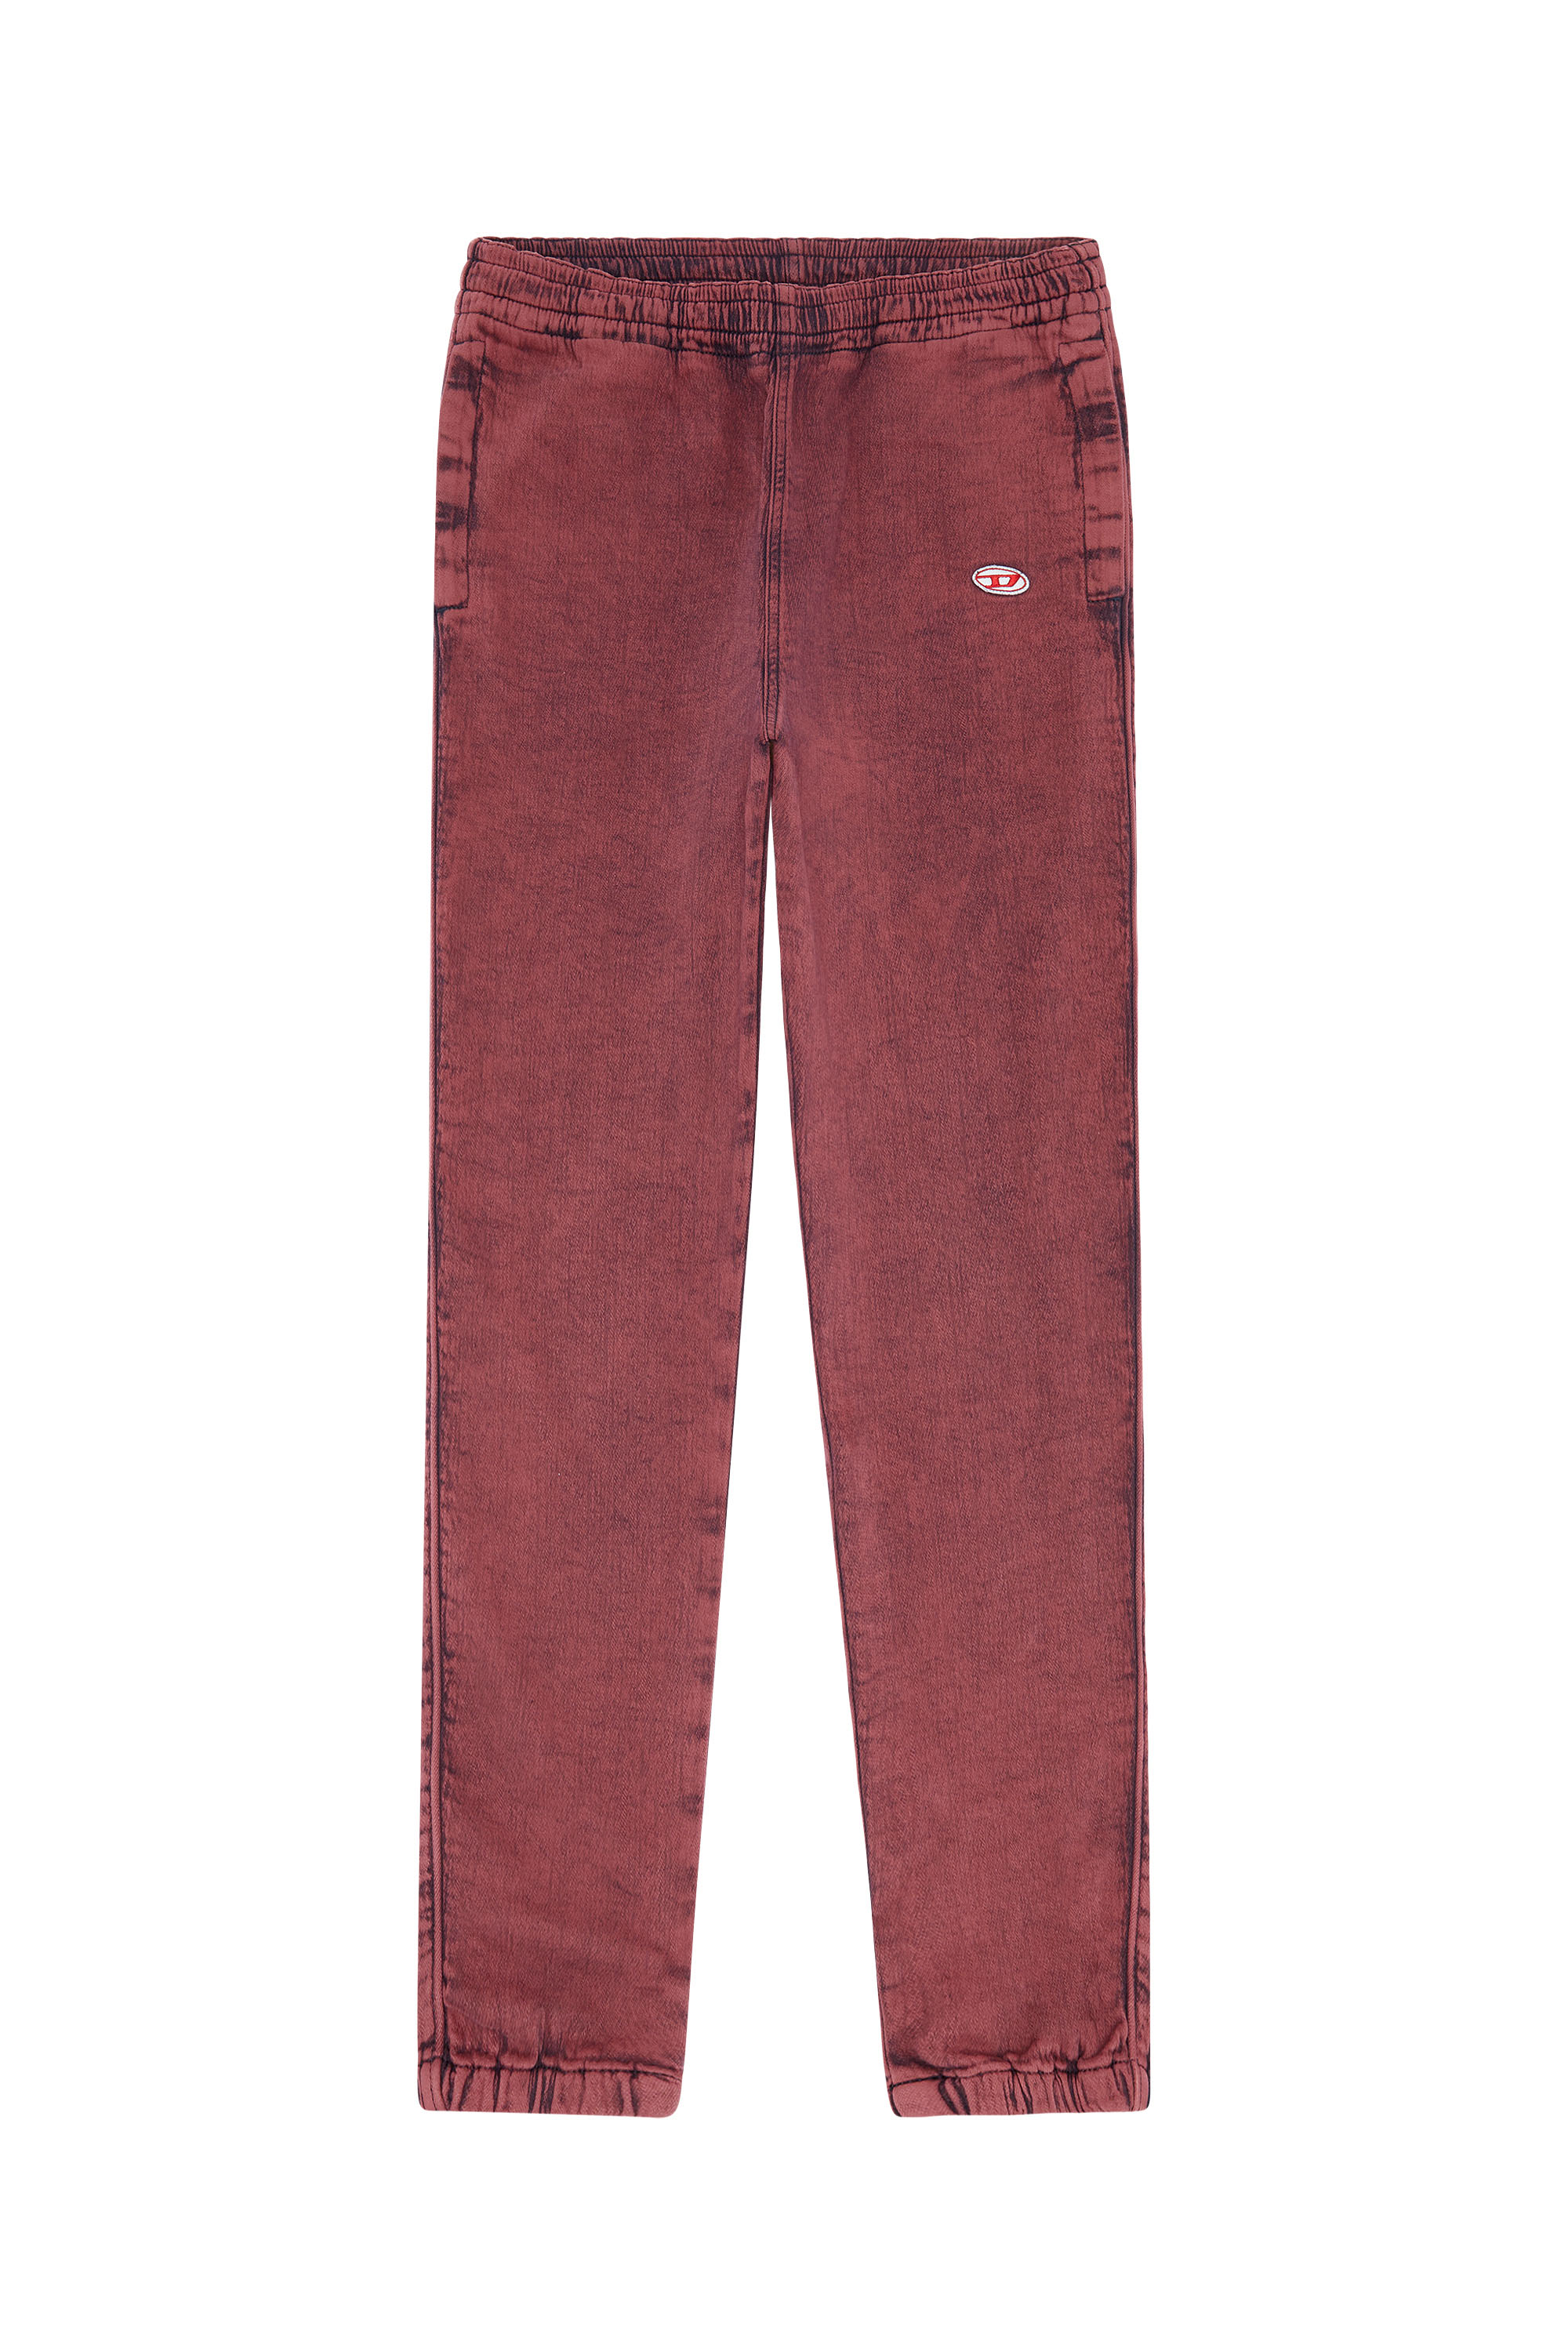 D-Lab Track Denim 09E32 Tapered, Red - Jeans